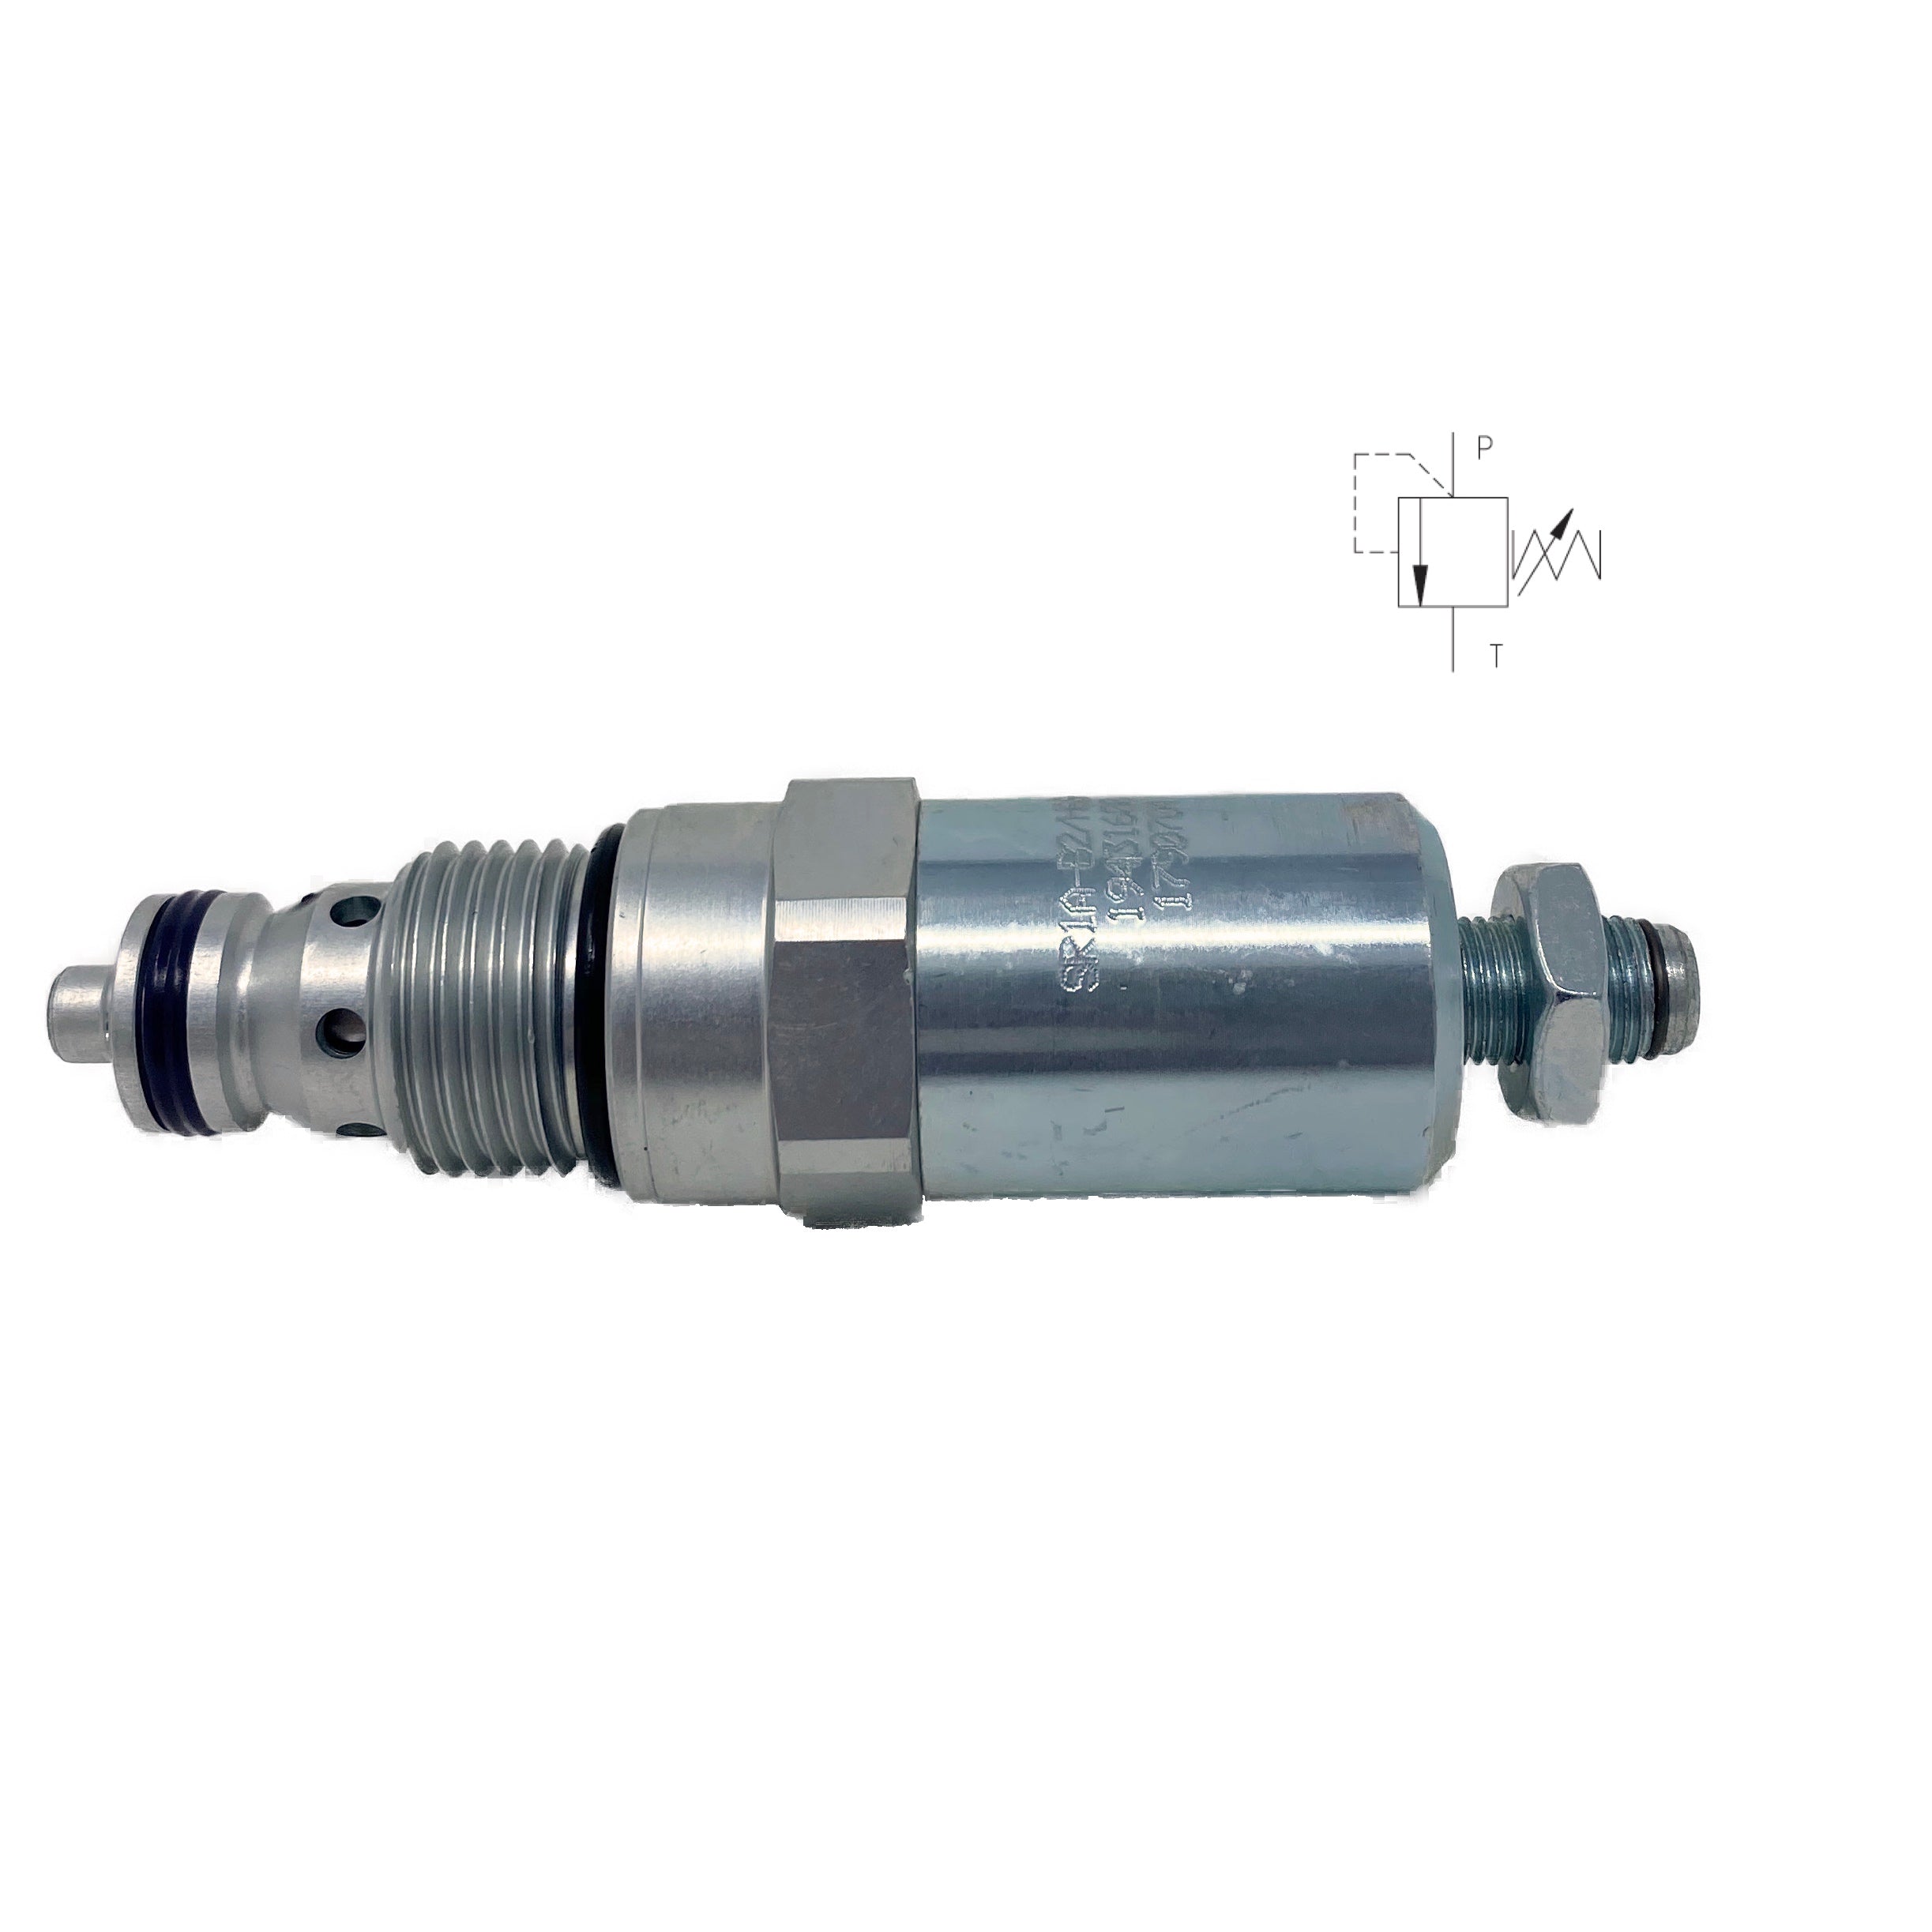 SR1A-B2/H10S-A : Argo Pressure Relief Valve, Poppet Type, Direct Acting, 16 GPM, 6100psi, Allen Key Screw, Adjustable Up to 1450psi, Fits C-10-2 Cavity